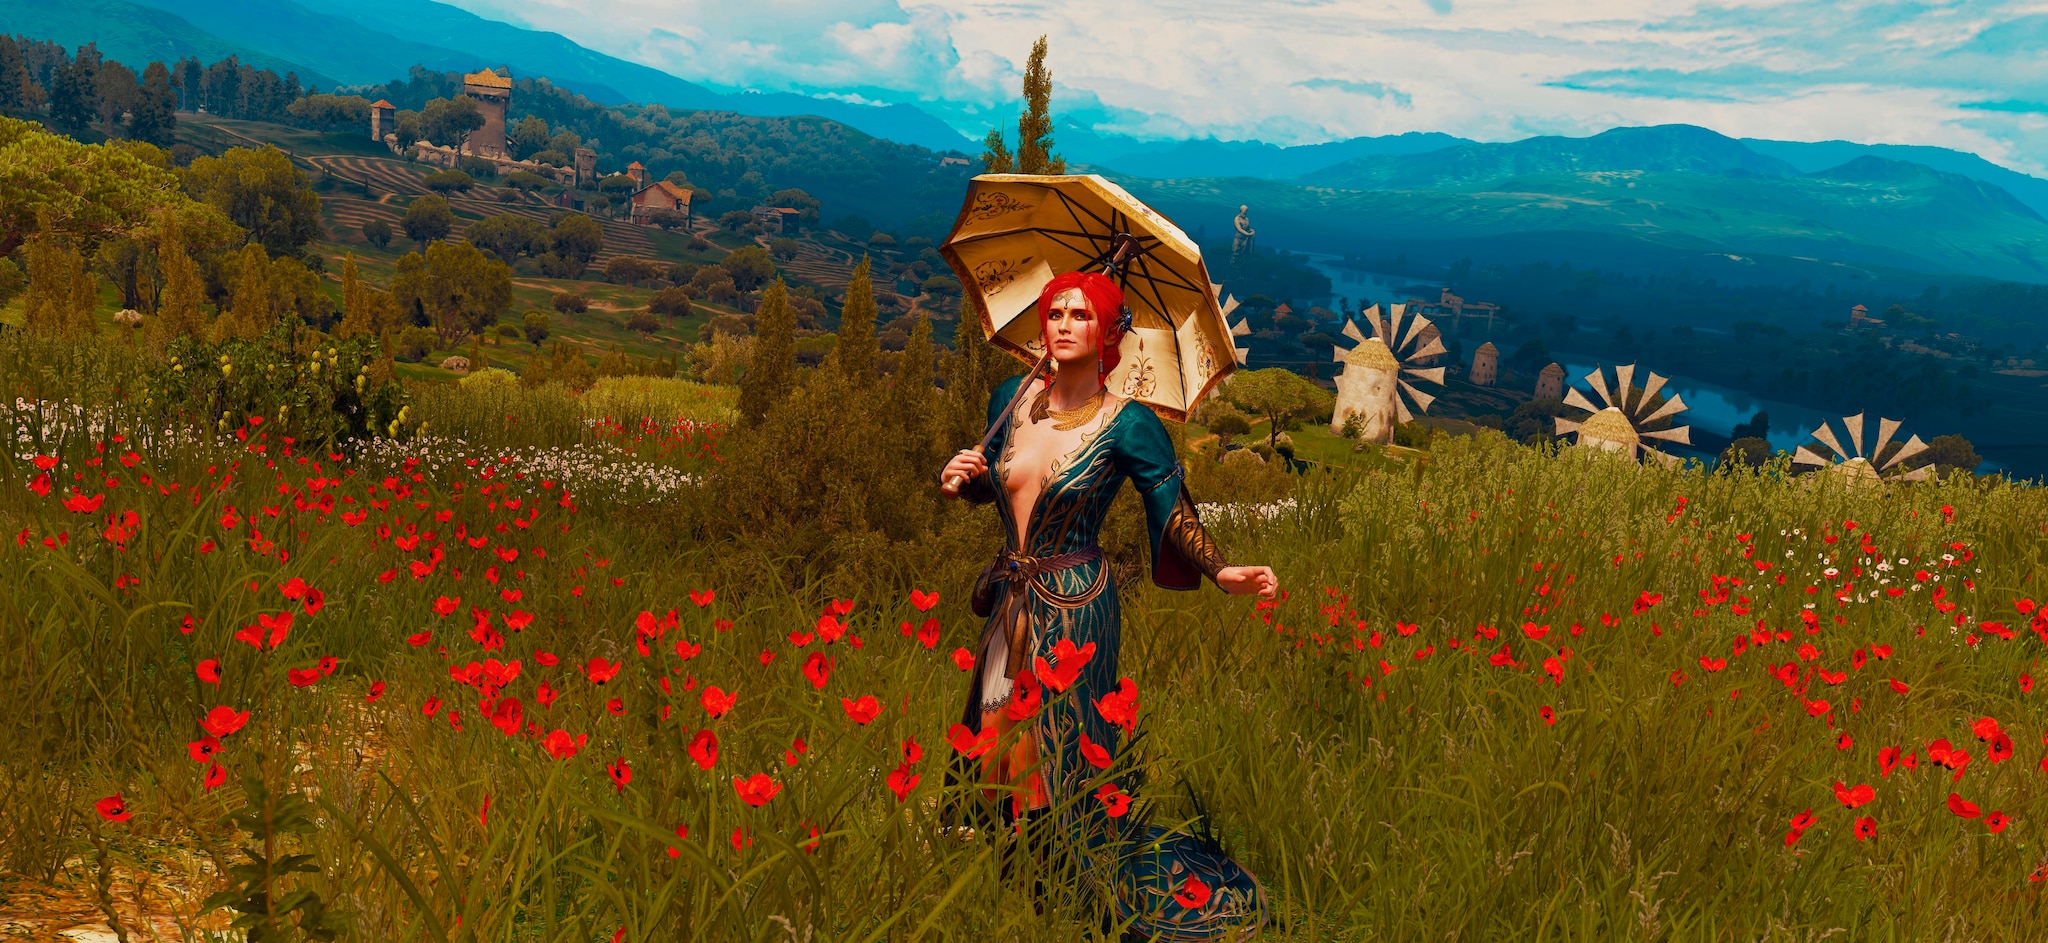 Acrobatics metric ribbon The Witcher 3: Wild Hunt - The Witcher 3 all Console Commands - Steam Lists